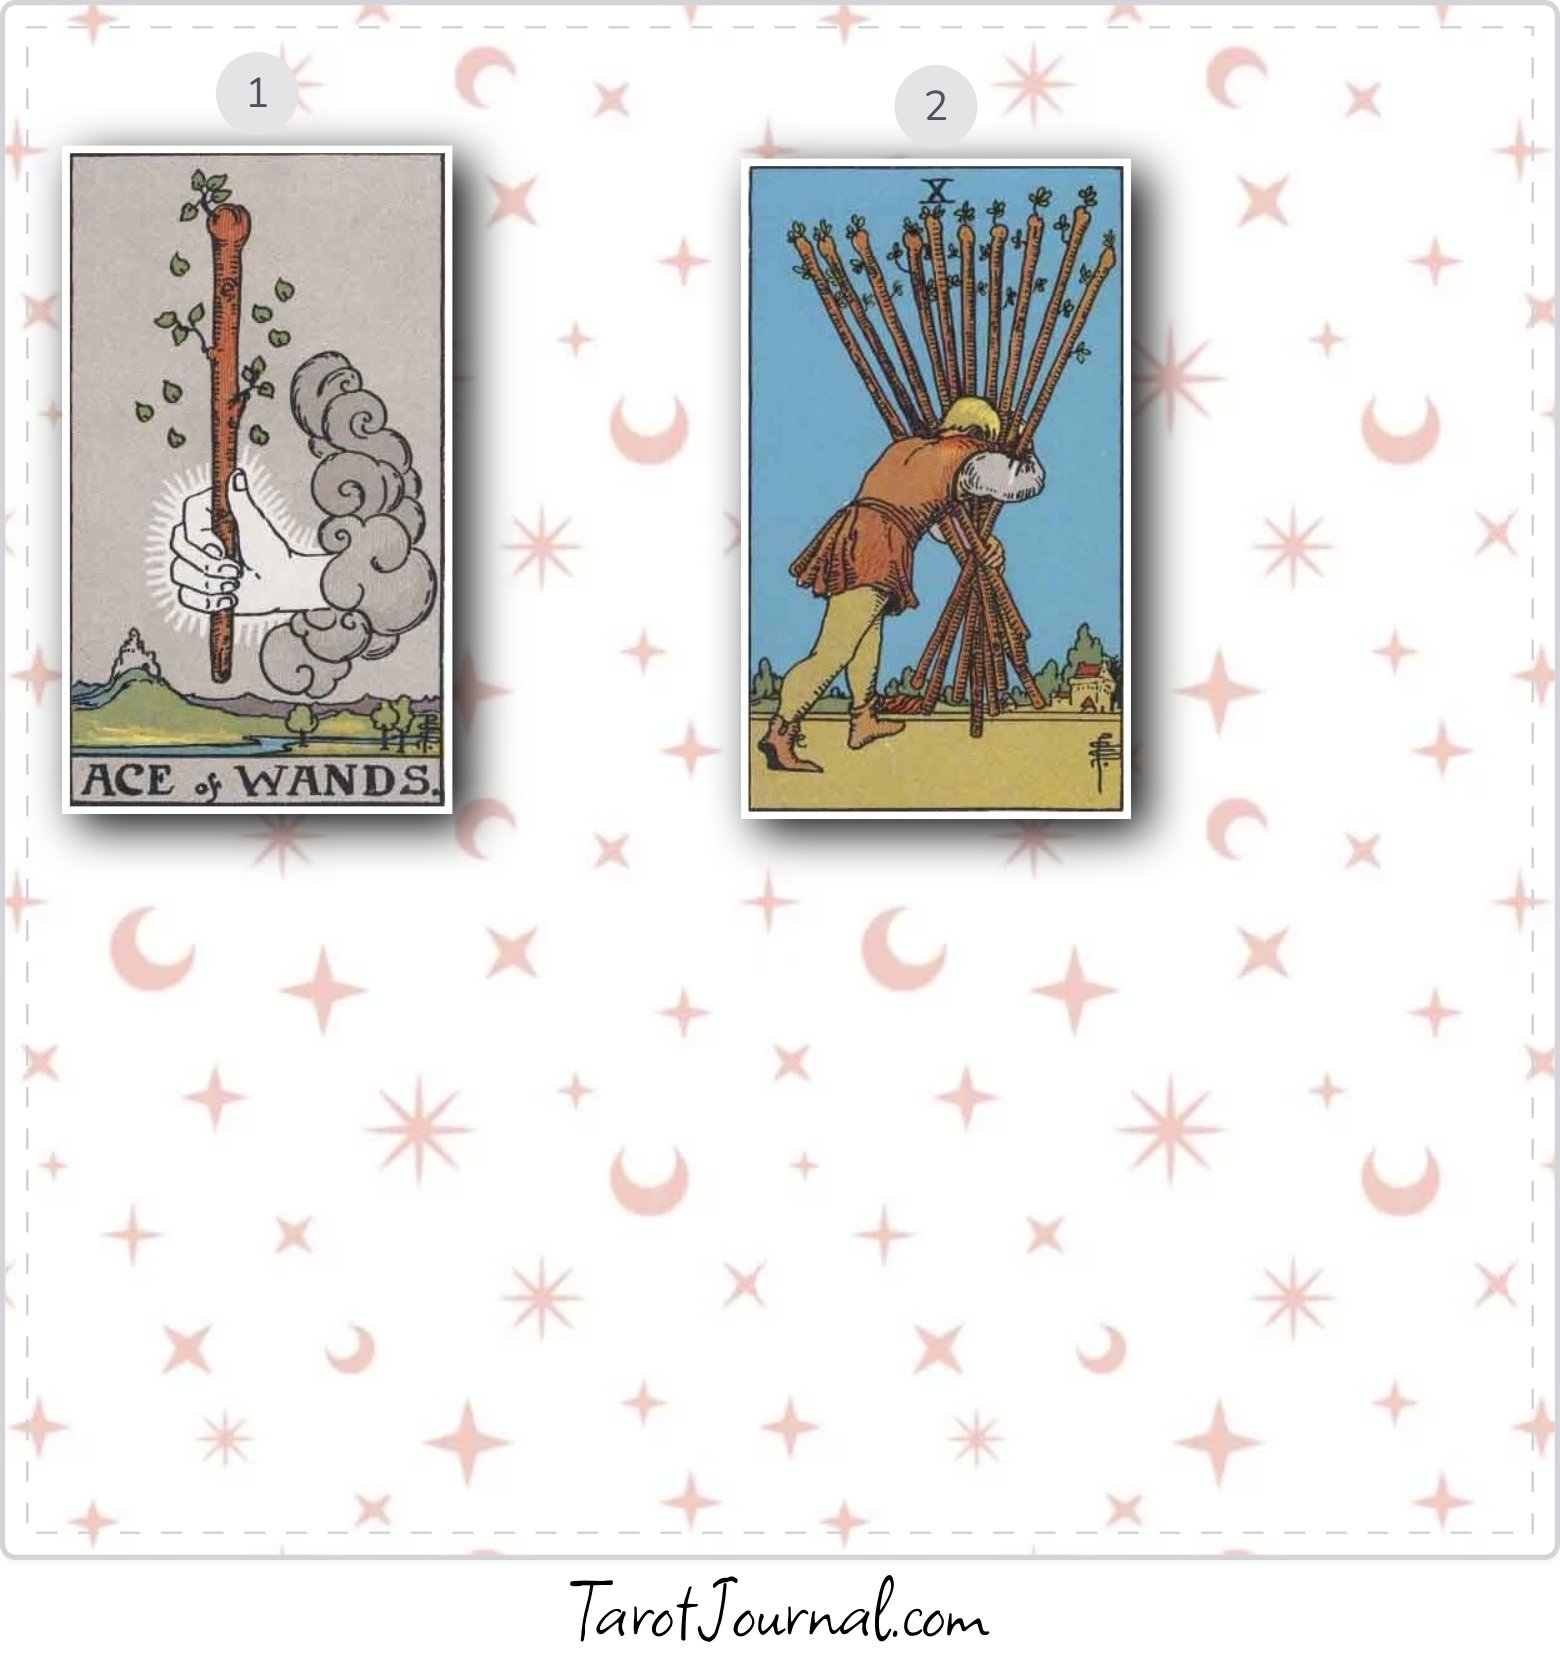 How can I be ready for marriage? - tarot reading by Felicity